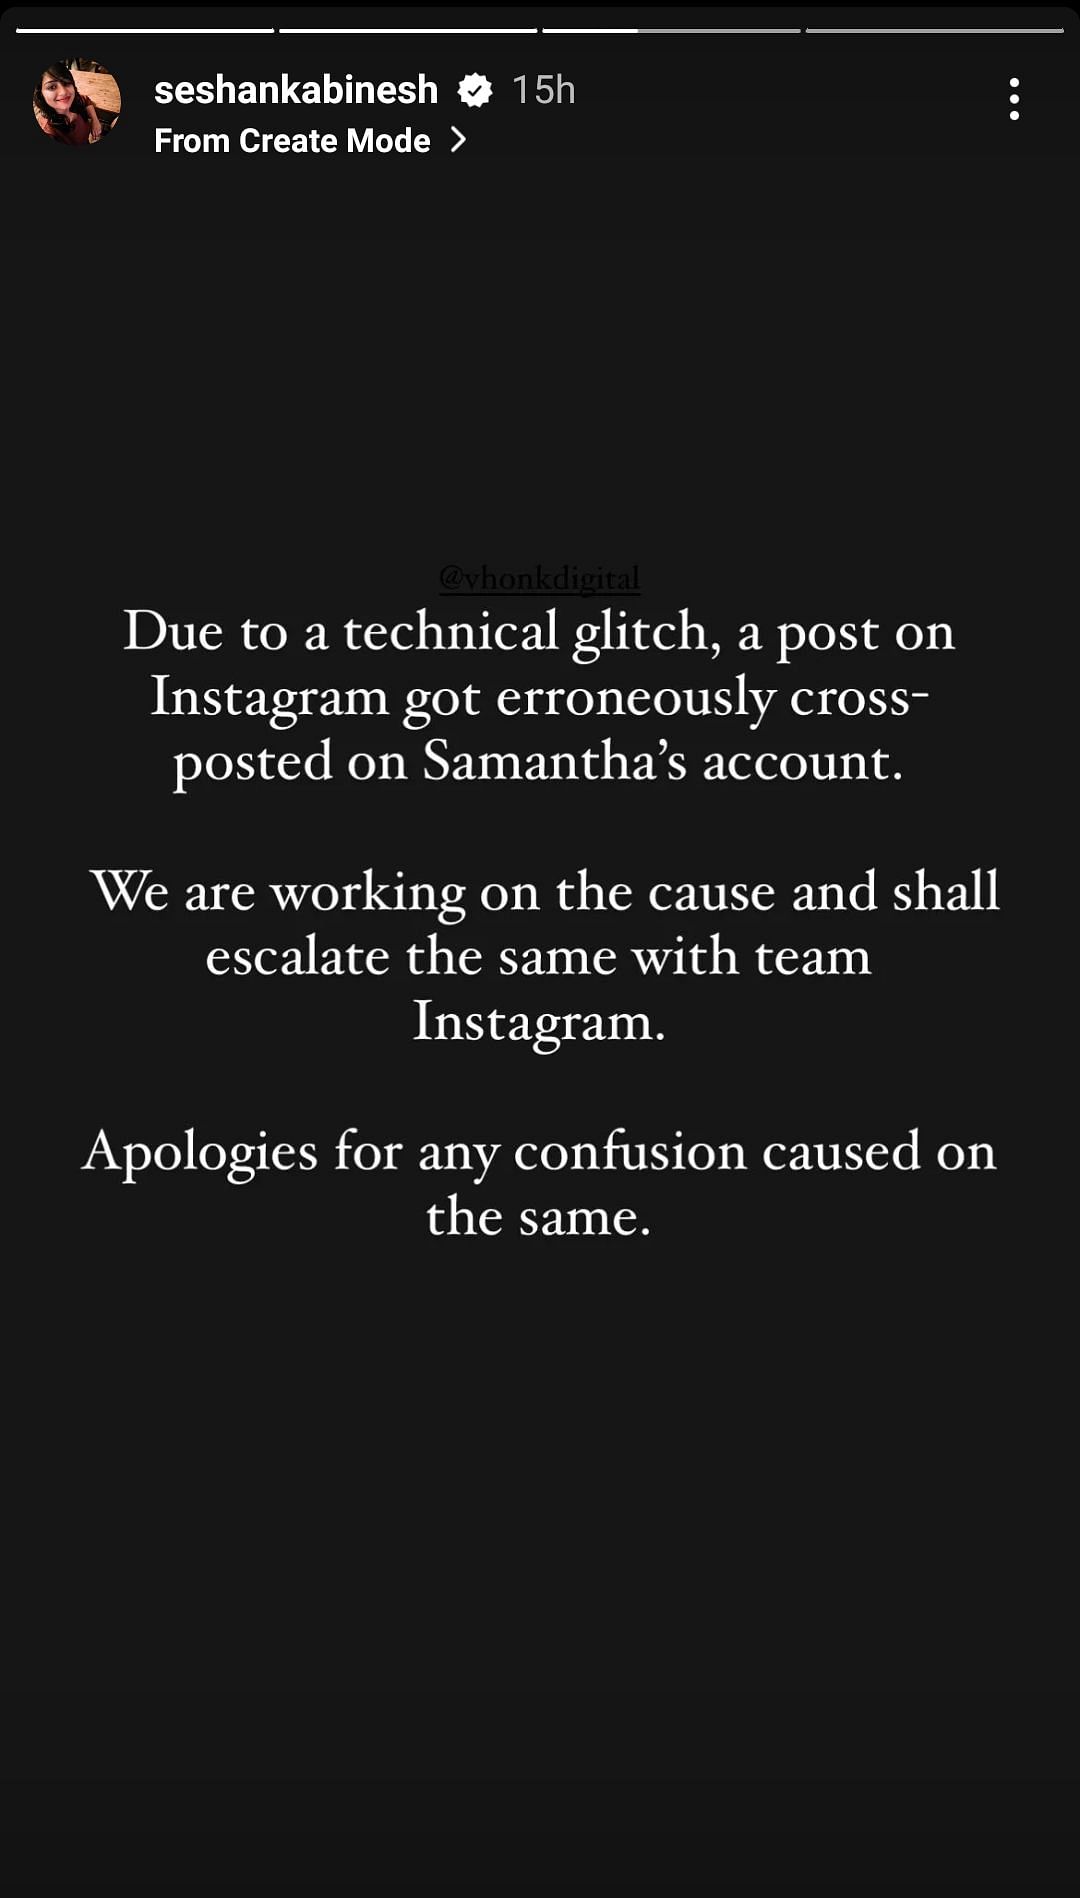 Fans questioned if Samantha's Instagram was 'hacked' after they saw a strange post on her account.